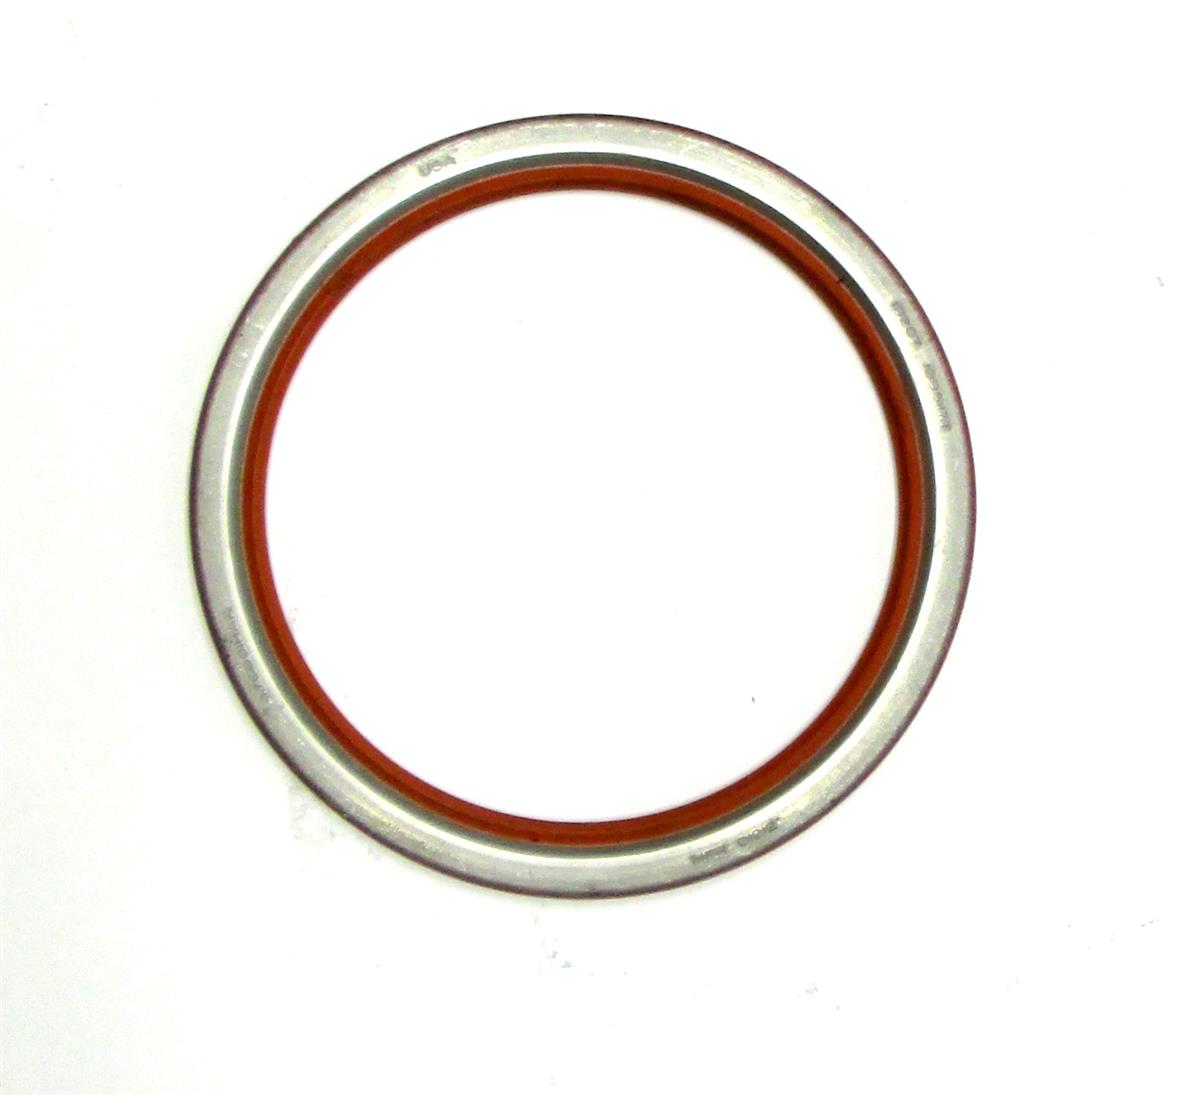 COM-3073 | COM-3073 Rear Main Engine Seal for LDT-465 and LDS-465 Multifuel Diesel Engines Update (8).JPG